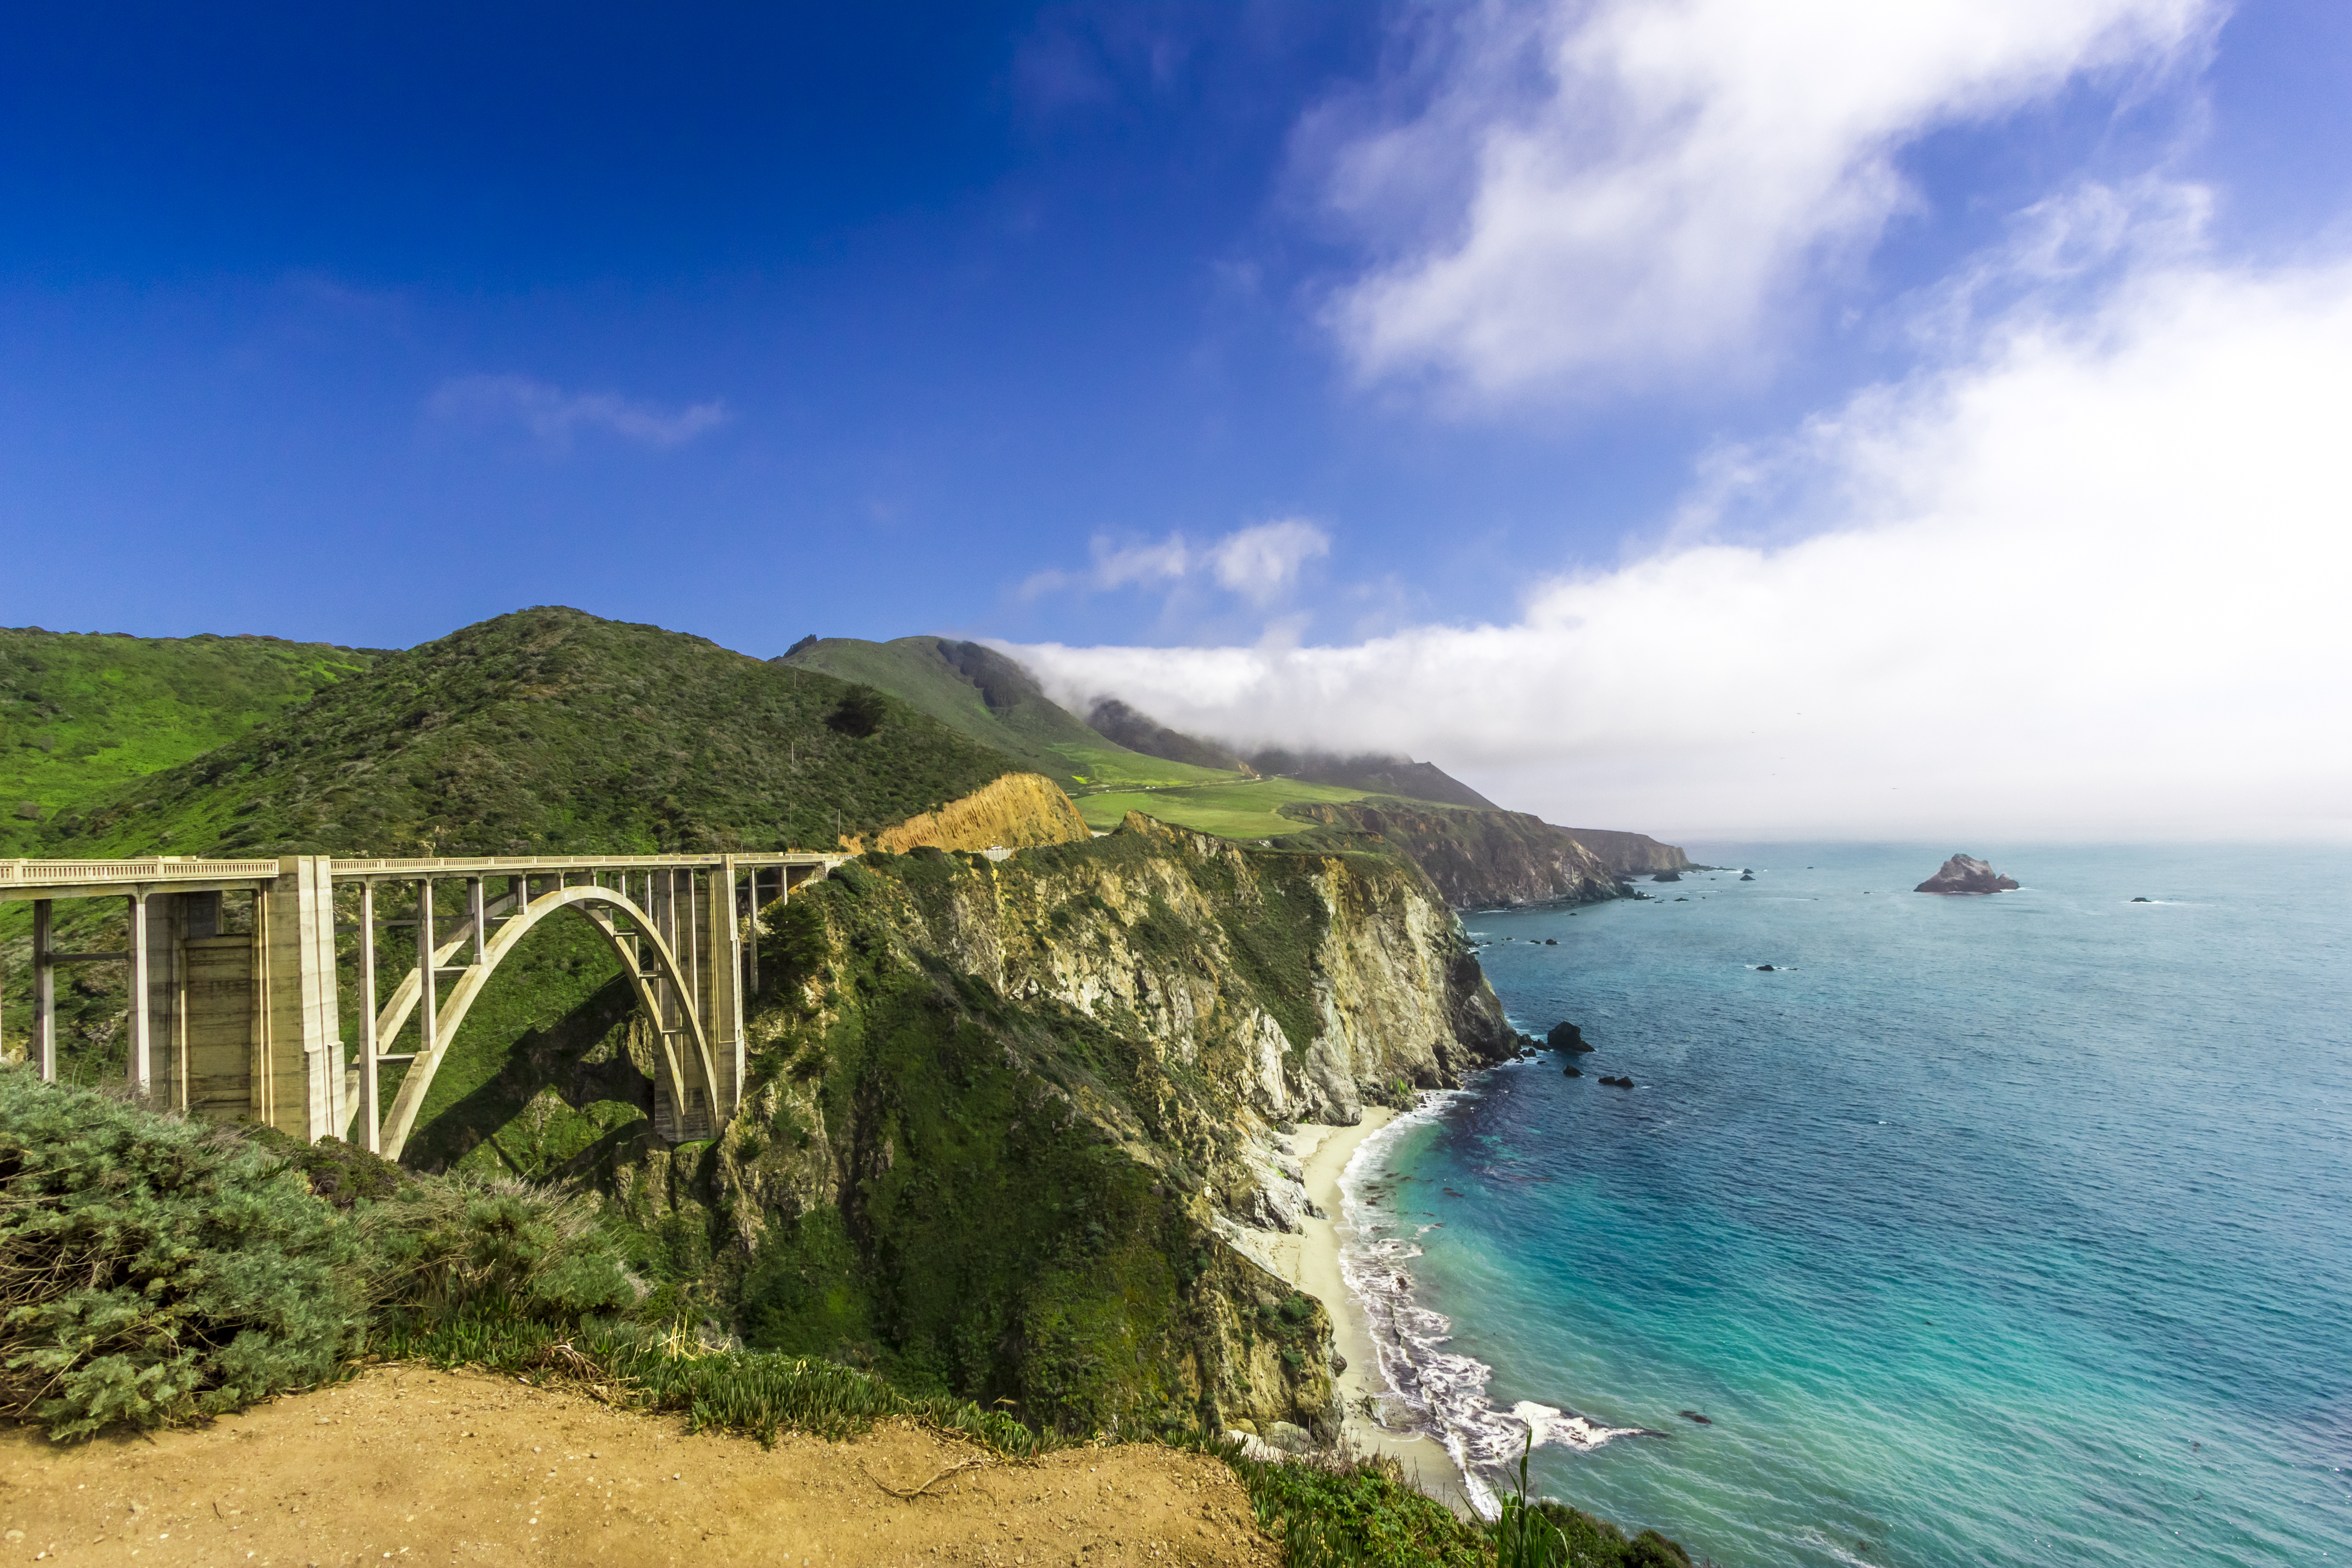 The Bixby Bridge on the Big Sur Coast with fog and the crashing waves of the Pacific Ocean.South of Carmel-by-the-Sea , California [url=file_closeup.php?id=23433775][img]file_thumbview_approve.php?size=1&id=23433775[/img][/url] [url=file_closeup.php?id=23520992][img]file_thumbview_approve.php?size=1&id=23520992[/img][/url] [url=file_closeup.php?id=24695695][img]file_thumbview_approve.php?size=1&id=24695695[/img][/url] [url=file_closeup.php?id=25180965][img]file_thumbview_approve.php?size=1&id=25180965[/img][/url] [url=file_closeup.php?id=25181549][img]file_thumbview_approve.php?size=1&id=25181549[/img][/url] [url=file_closeup.php?id=25188097][img]file_thumbview_approve.php?size=1&id=25188097[/img][/url] [url=file_closeup.php?id=25190471][img]file_thumbview_approve.php?size=1&id=25190471[/img][/url] [url=file_closeup.php?id=25211405][img]file_thumbview_approve.php?size=1&id=25211405[/img][/url] [url=file_closeup.php?id=25212009][img]file_thumbview_approve.php?size=1&id=25212009[/img][/url] [url=file_closeup.php?id=25212412][img]file_thumbview_approve.php?size=1&id=25212412[/img][/url] [url=file_closeup.php?id=25212675][img]file_thumbview_approve.php?size=1&id=25212675[/img][/url] [url=file_closeup.php?id=25212979][img]file_thumbview_approve.php?size=1&id=25212979[/img][/url] [url=file_closeup.php?id=25214431][img]file_thumbview_approve.php?size=1&id=25214431[/img][/url] [url=file_closeup.php?id=25214747][img]file_thumbview_approve.php?size=1&id=25214747[/img][/url] [url=file_closeup.php?id=25215136][img]file_thumbview_approve.php?size=1&id=25215136[/img][/url] [url=file_closeup.php?id=25215456][img]file_thumbview_approve.php?size=1&id=25215456[/img][/url] [url=file_closeup.php?id=25215716][img]file_thumbview_approve.php?size=1&id=25215716[/img][/url] [url=file_closeup.php?id=25215884][img]file_thumbview_approve.php?size=1&id=25215884[/img][/url] [url=file_closeup.php?id=25216377][img]file_thumbview_approve.php?size=1&id=25216377[/img][/url]